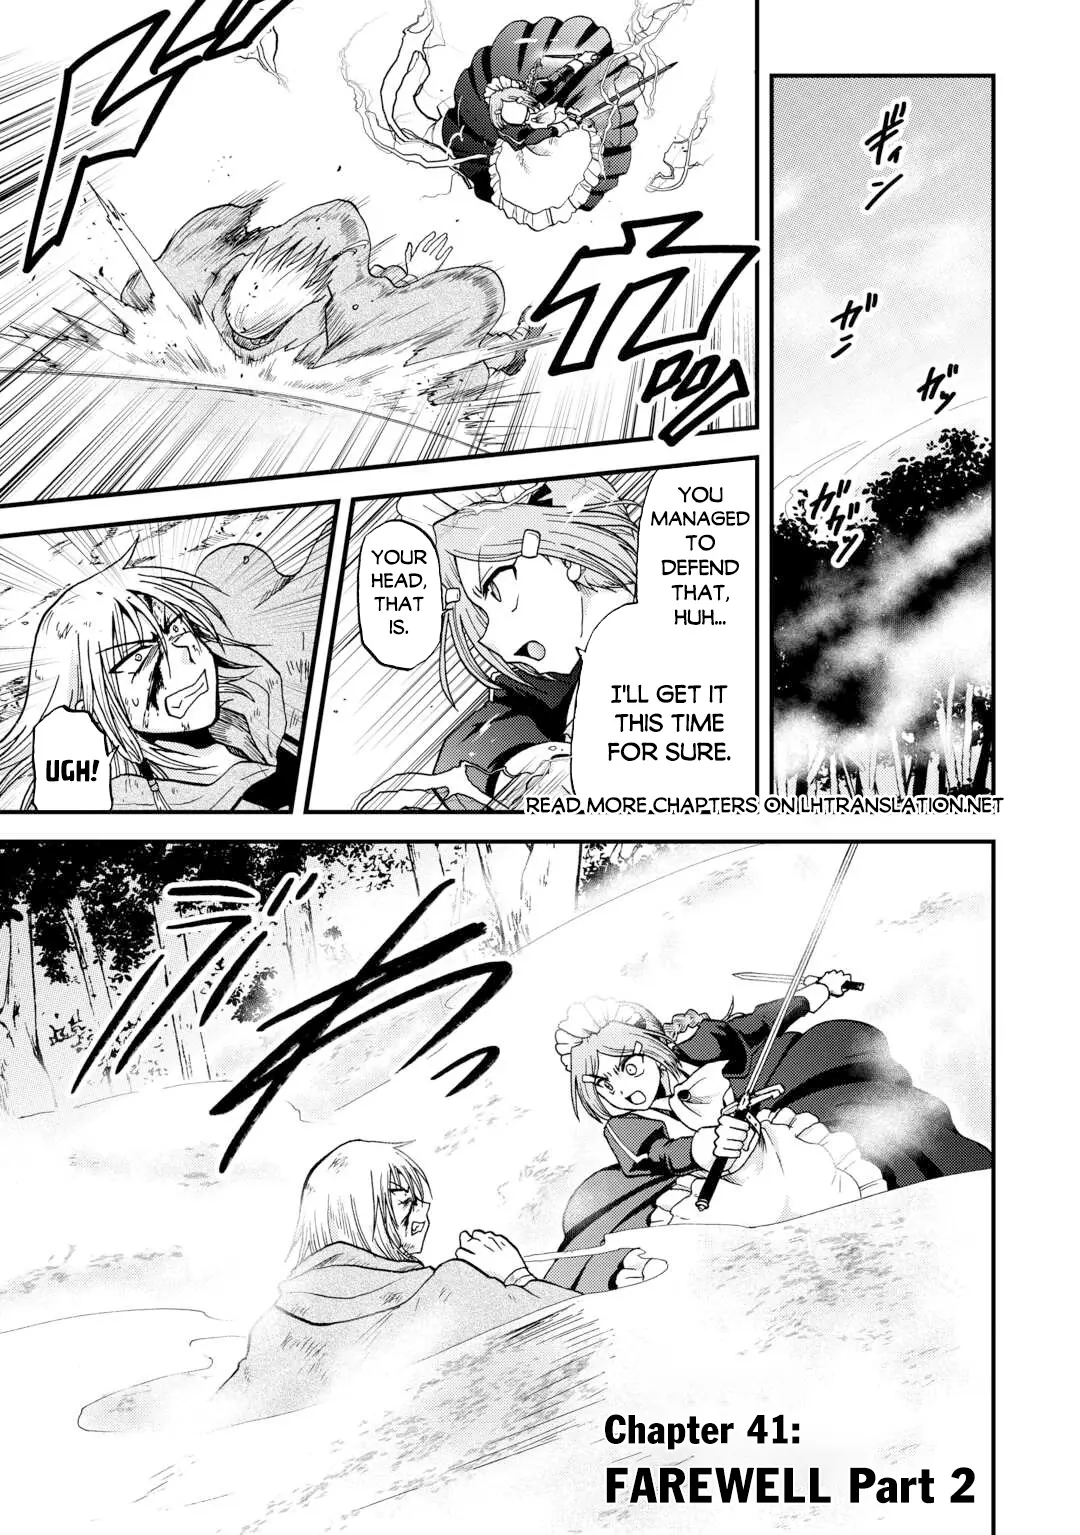 Previous Life Was Sword Emperor. This Life Is Trash Prince. - 41.2 page 2-6a7785dc